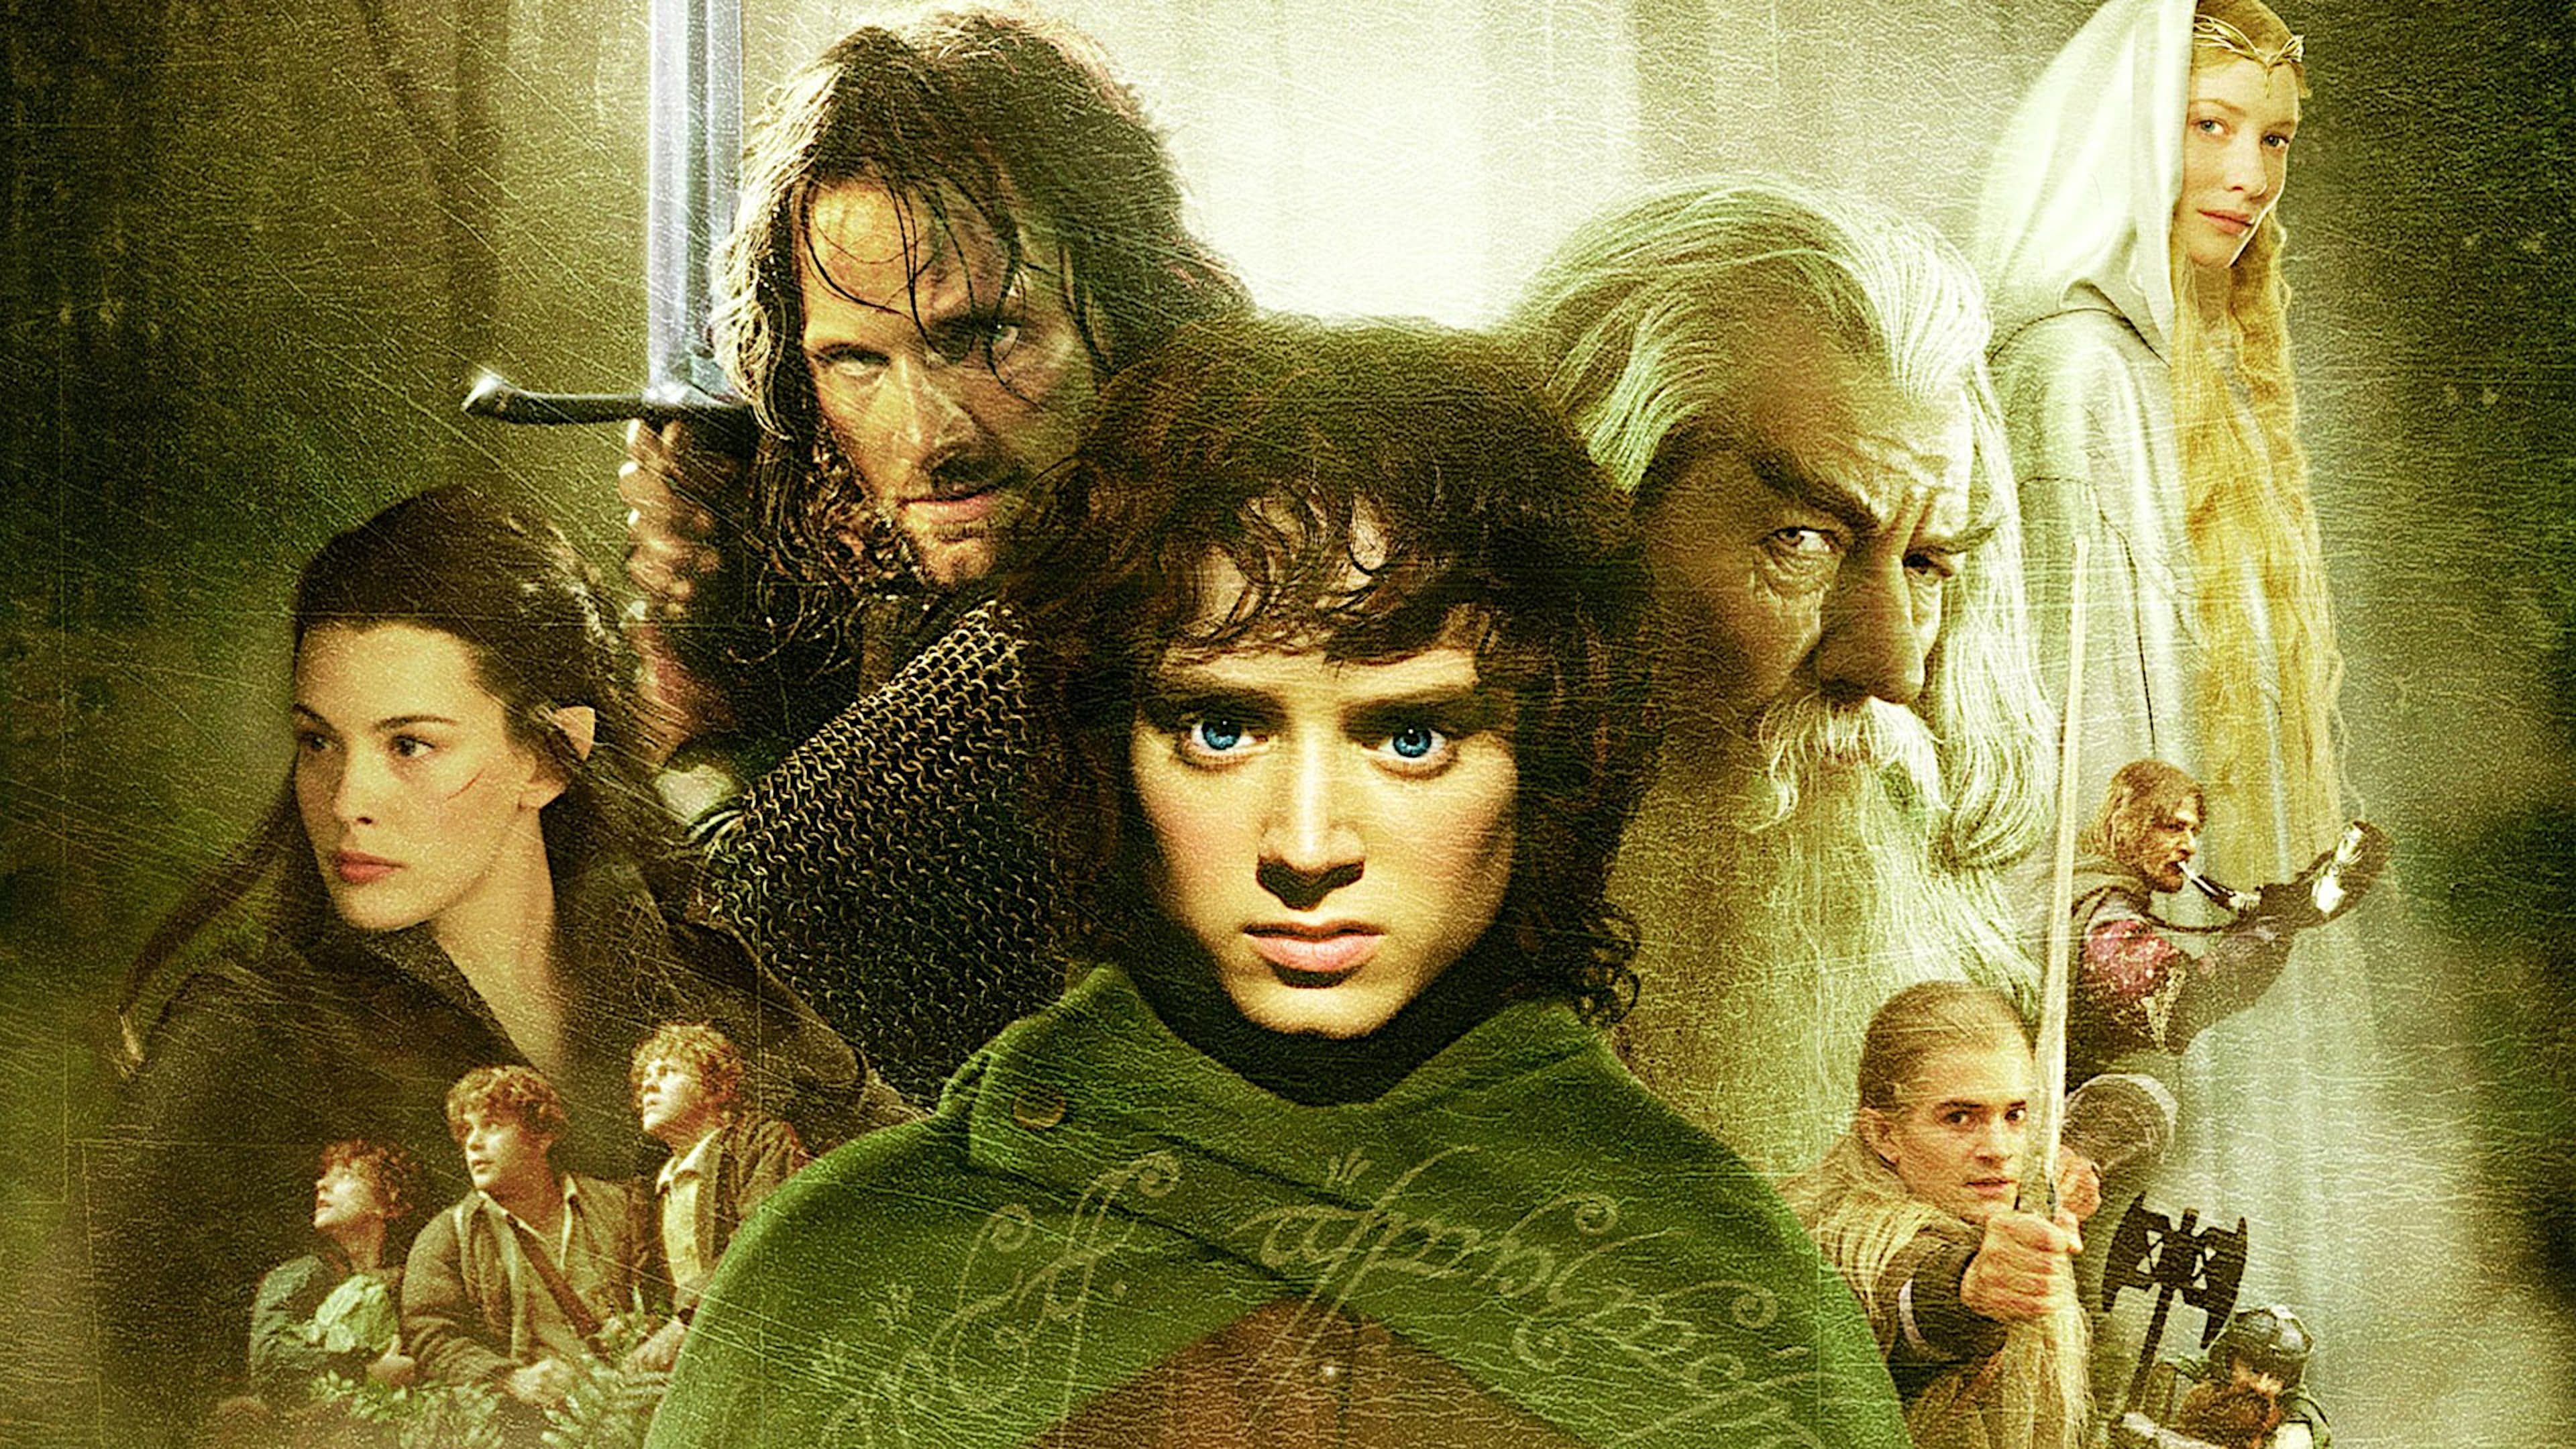 Poster Phim Chúa Tể Của Những Chiếc Nhẫn: Hiệp Hội Nhẫn Thần (The Lord of the Rings: The Fellowship of the Ring)